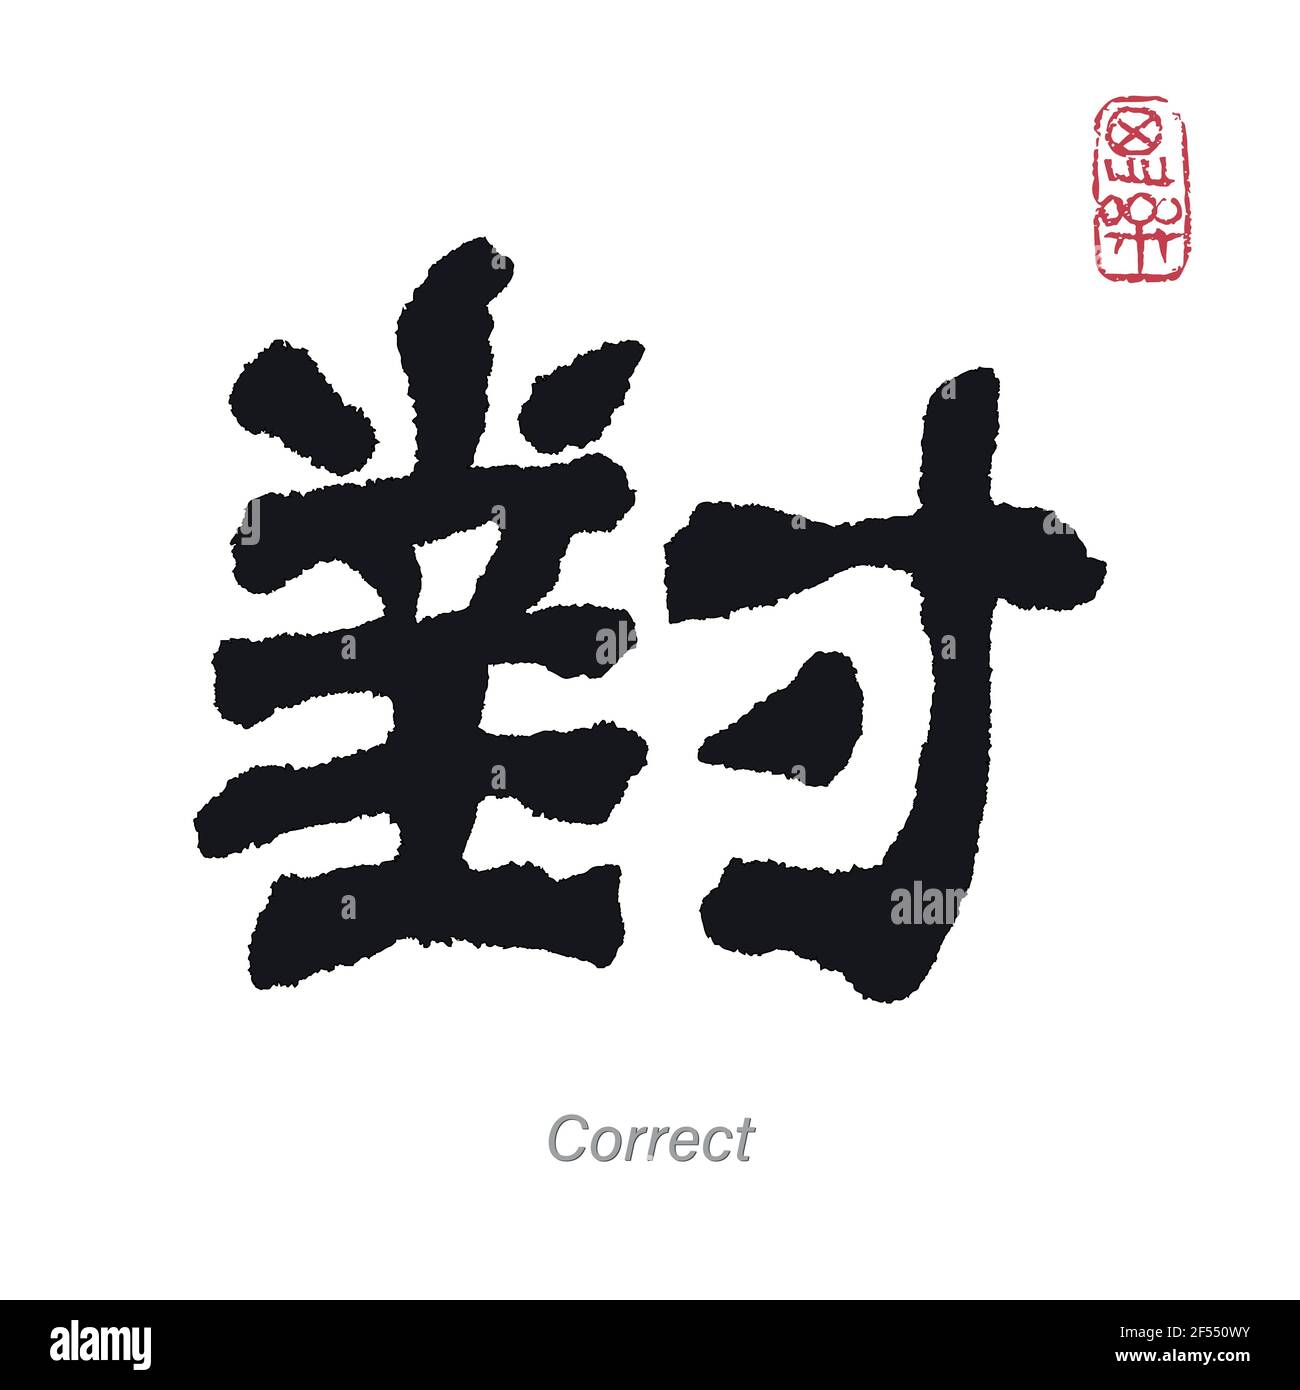 Character Correct Translation Chinese Calligraphy Stock Vector